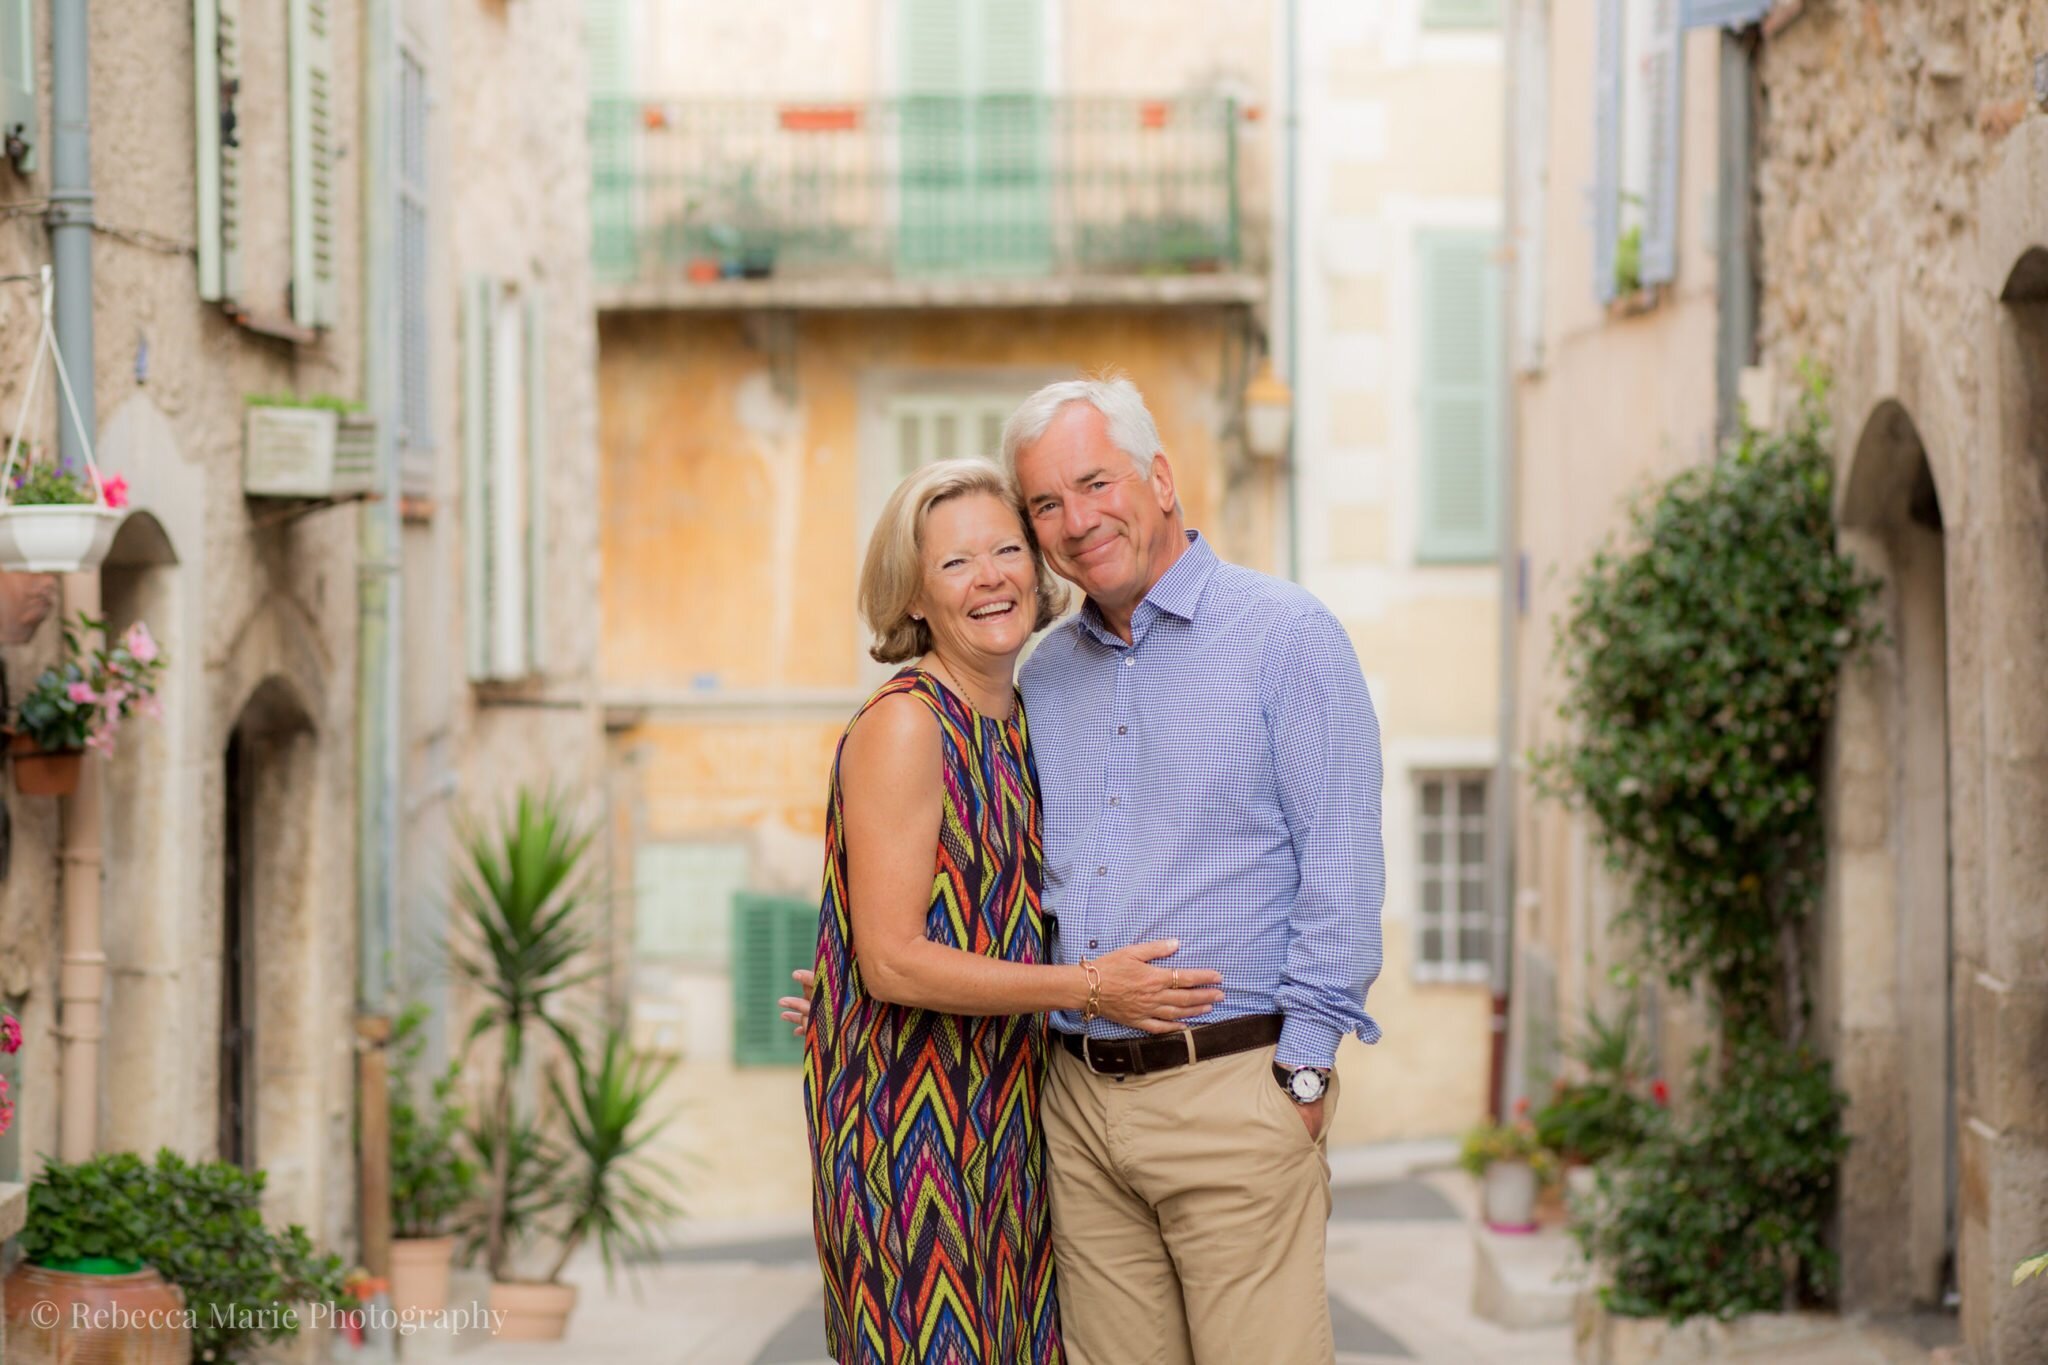 Portraits-in-France-Valbonne-Rebecca-Marie-Photography-6-1